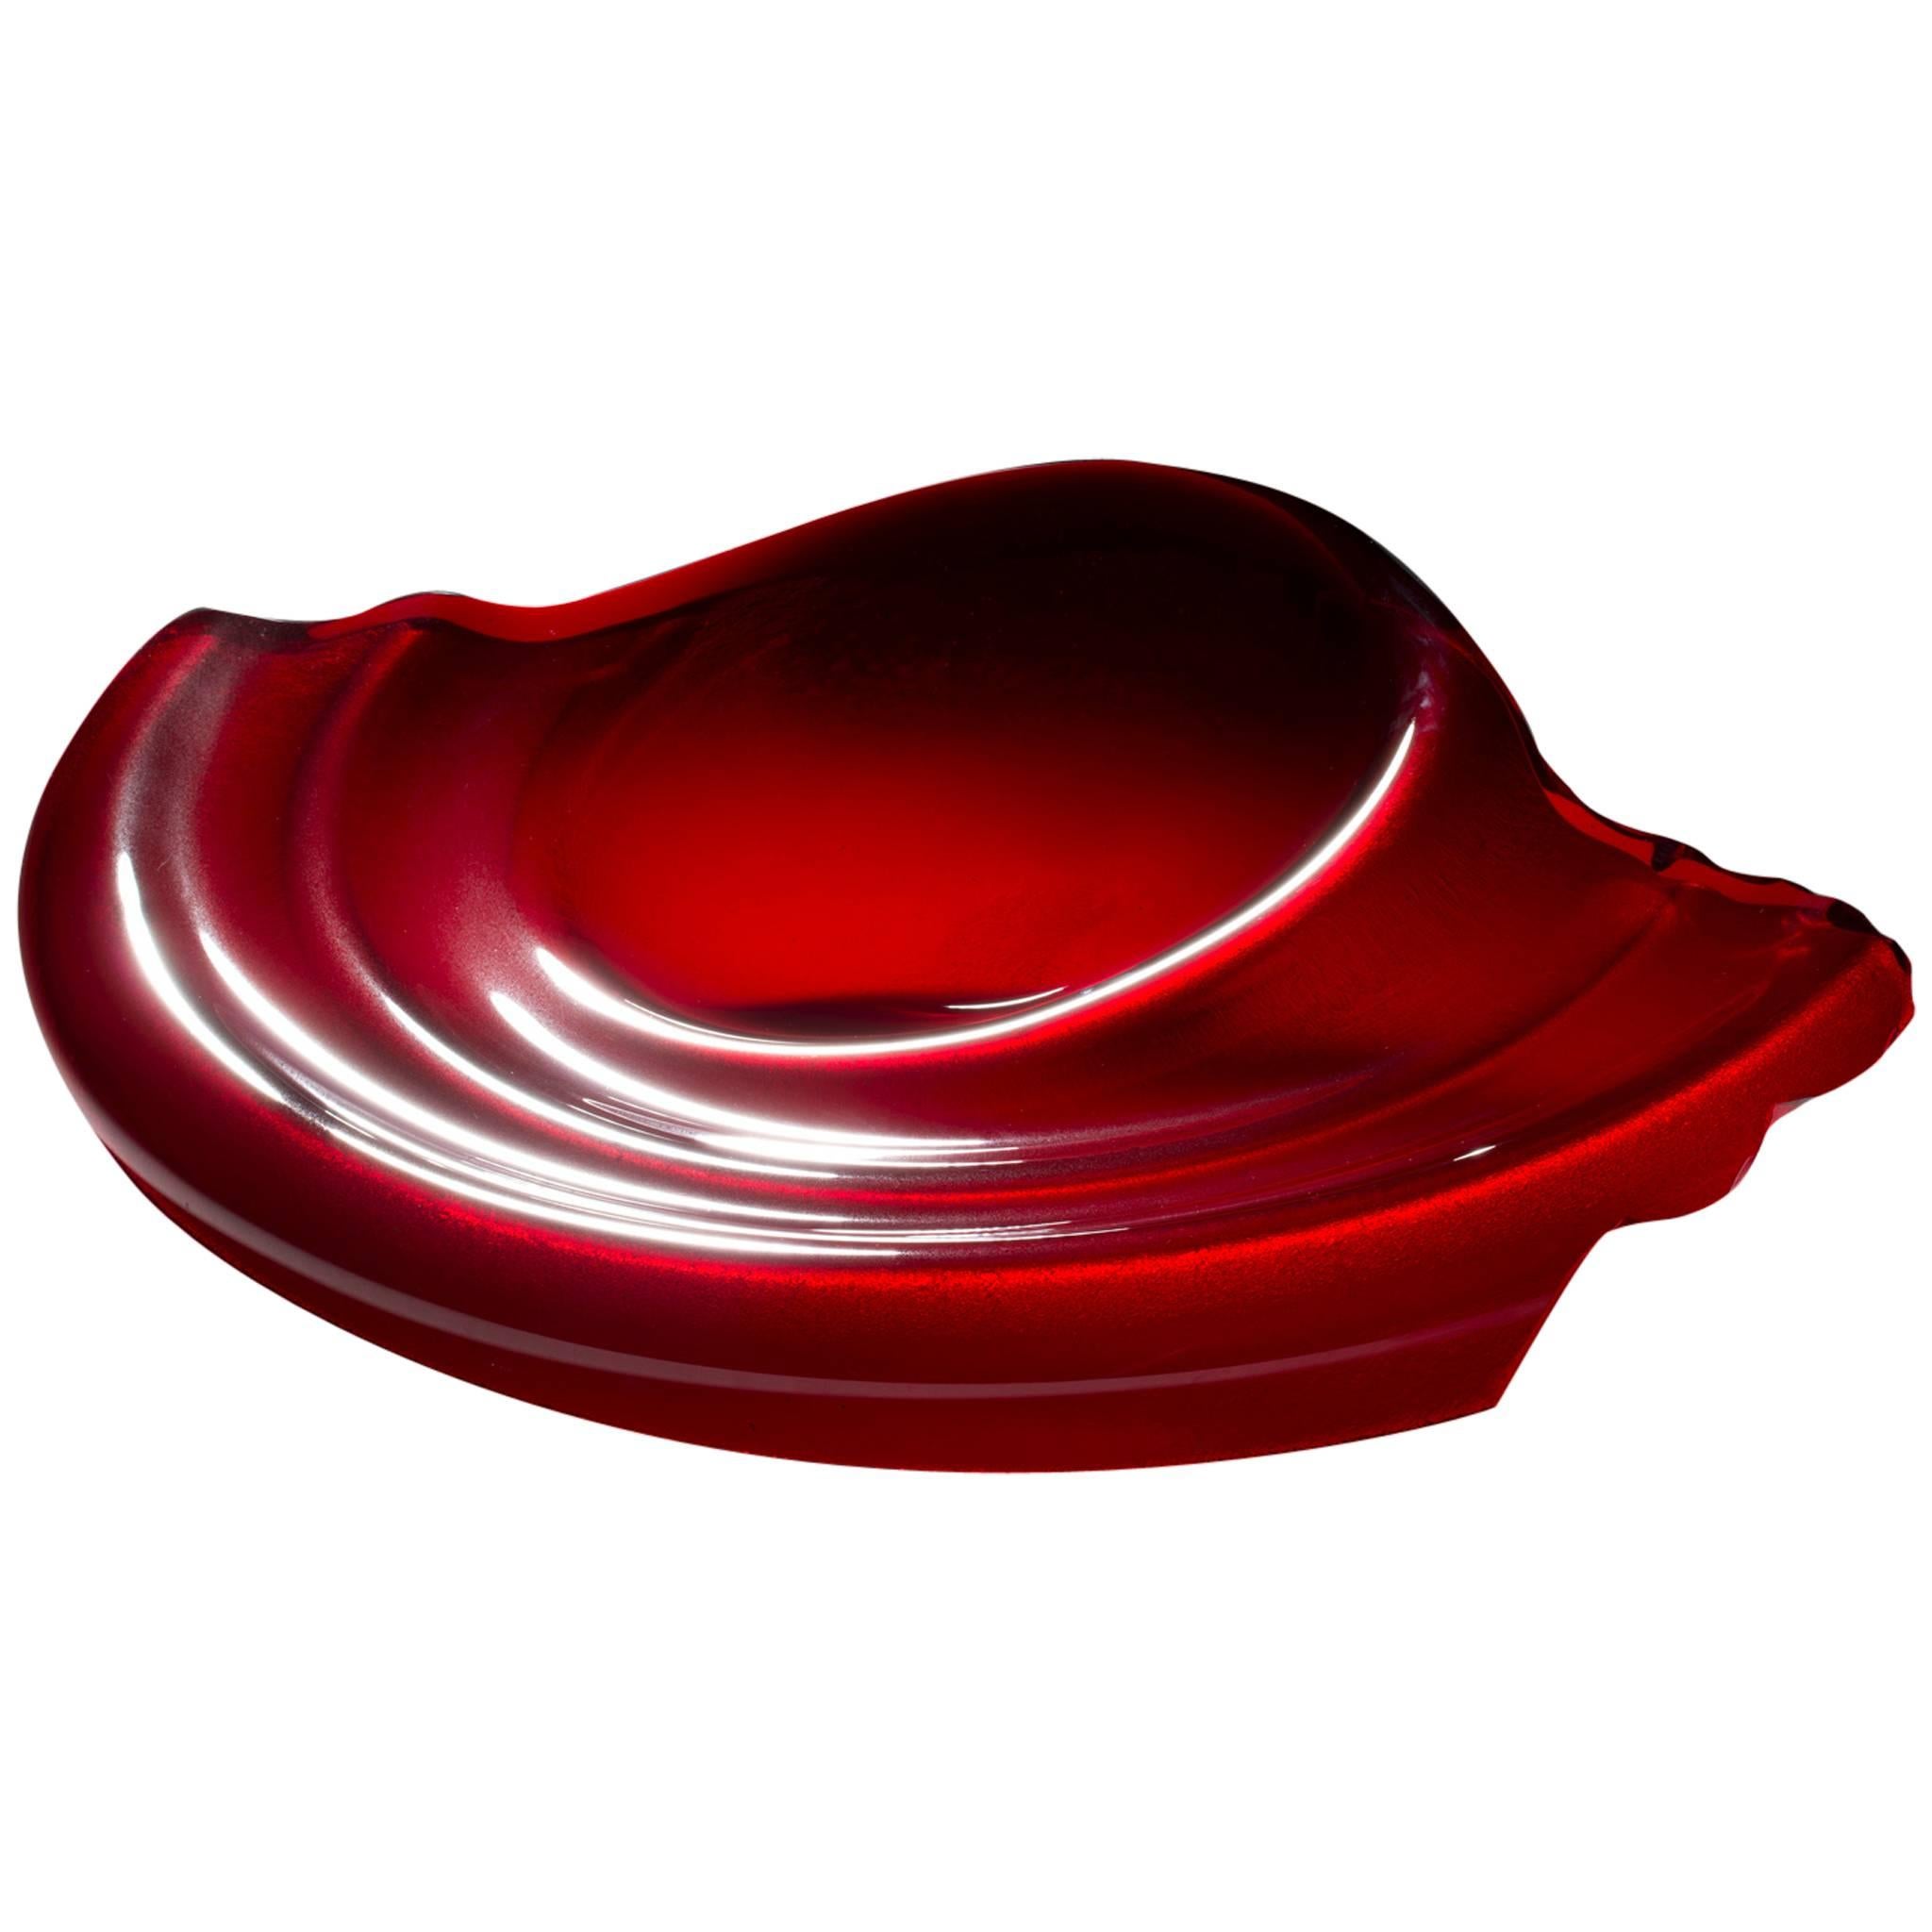 Ruby Maelstrom Bowl by Danny Lane For Sale